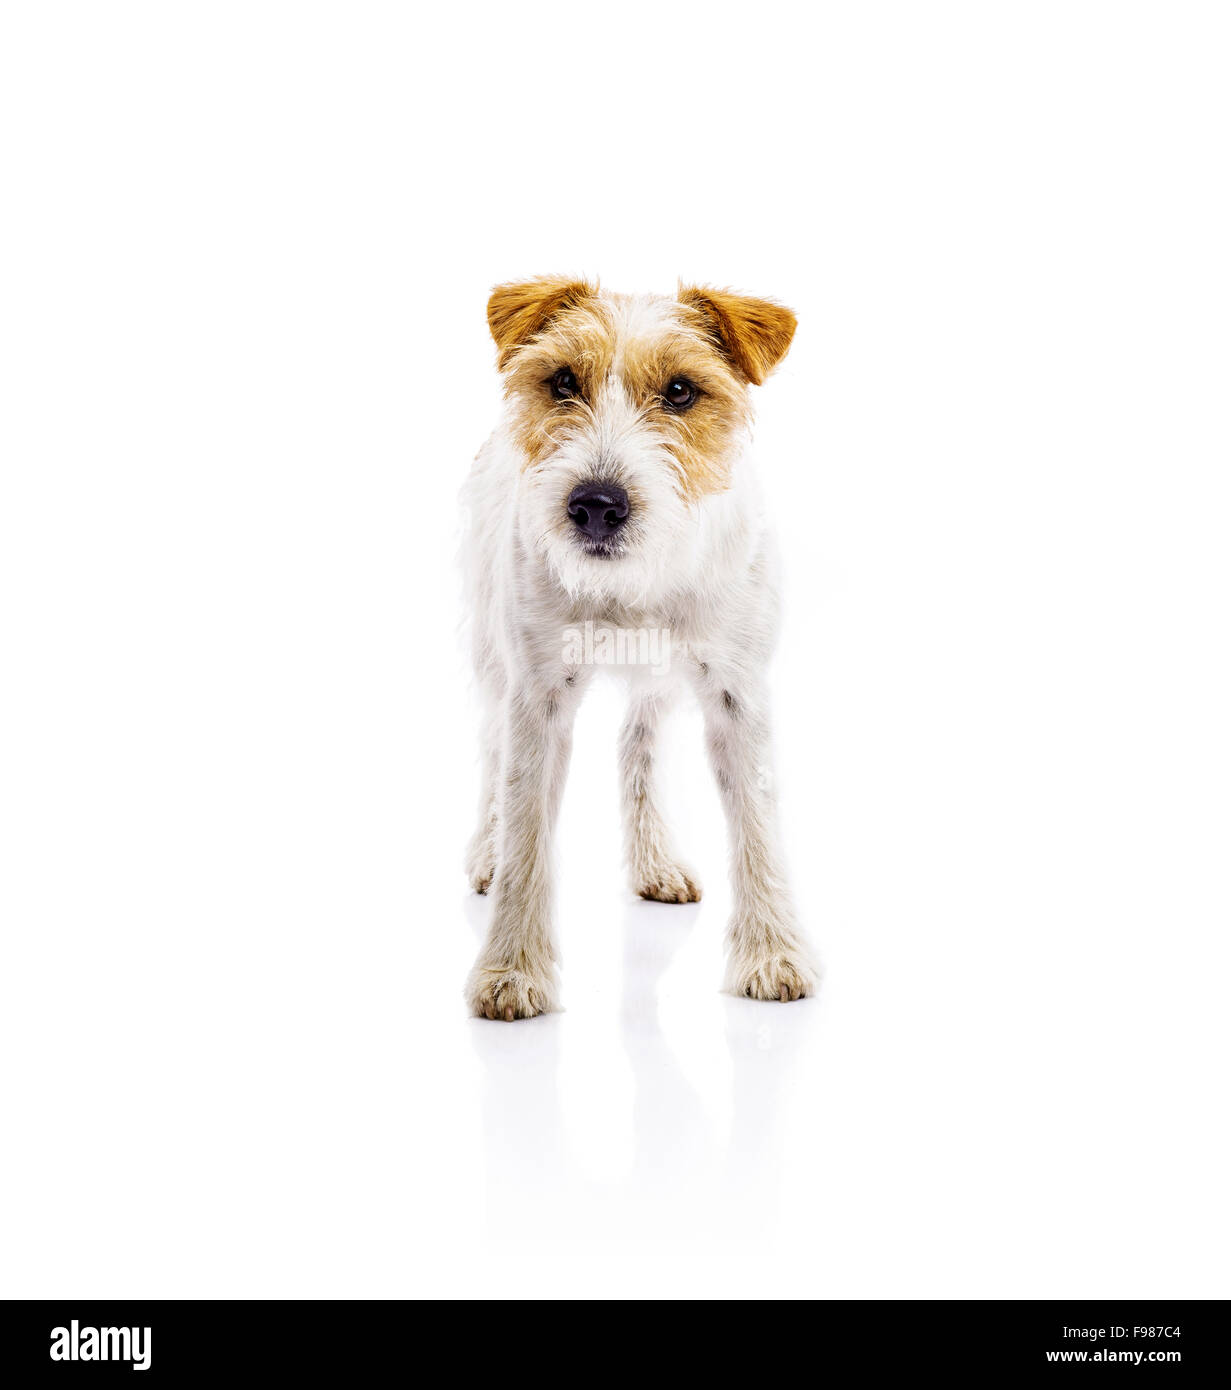 An adorable young parson russell terrier dog isolated on white background Stock Photo